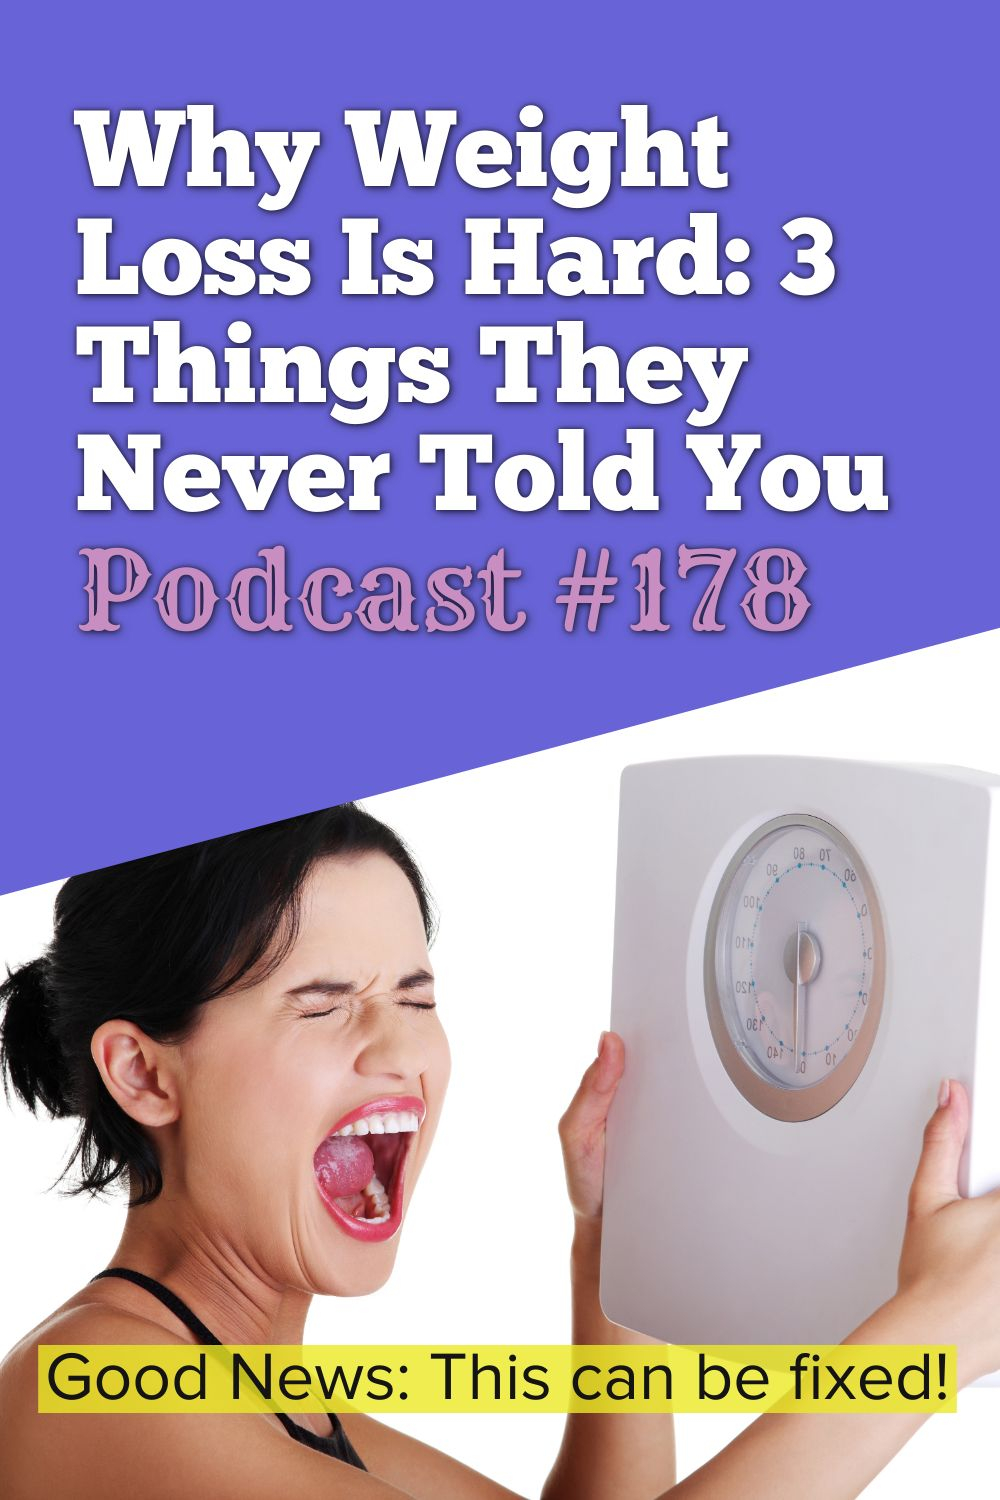 Why Weight Loss Is Hard (3 Things They Never Told You) [Podcast #178]